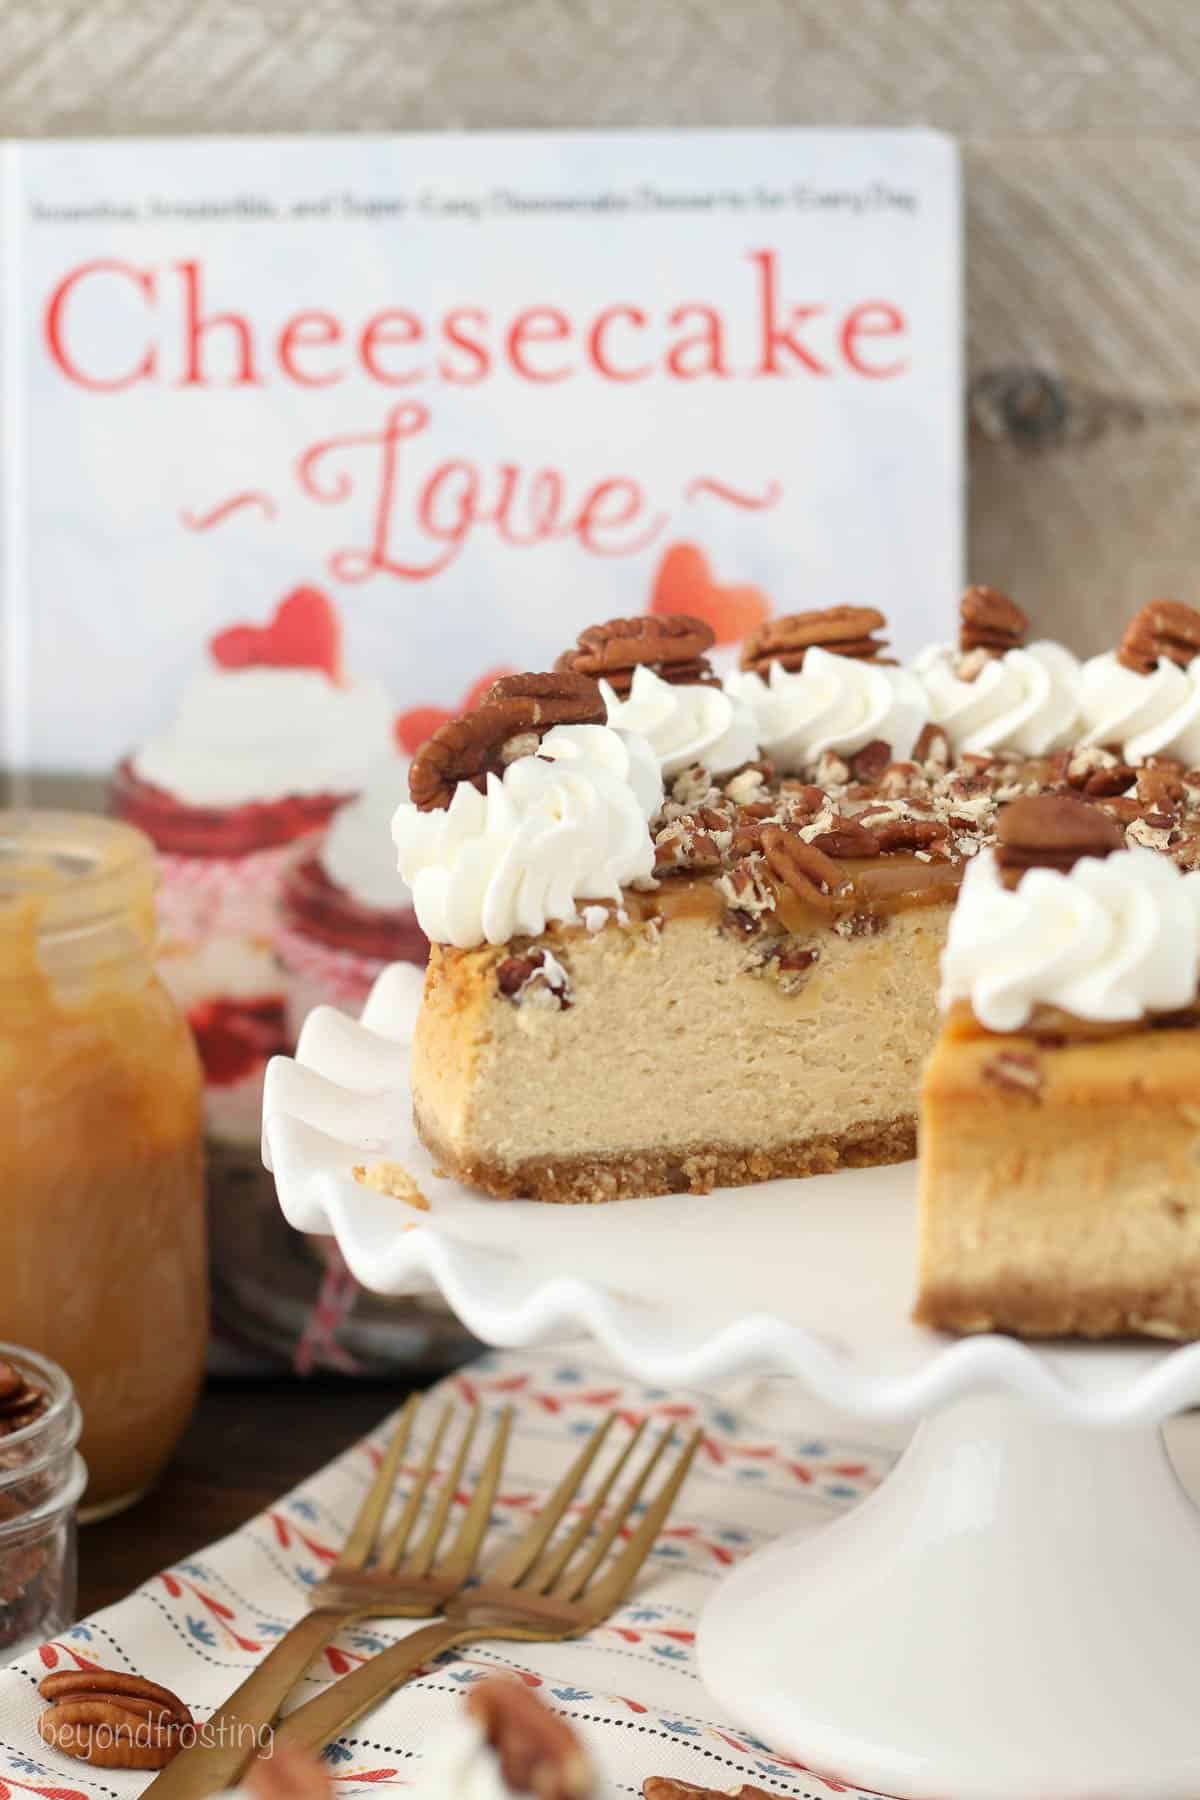 a caramel cheesecake on a cake stand in front of a book titled "Cheesecake Love"